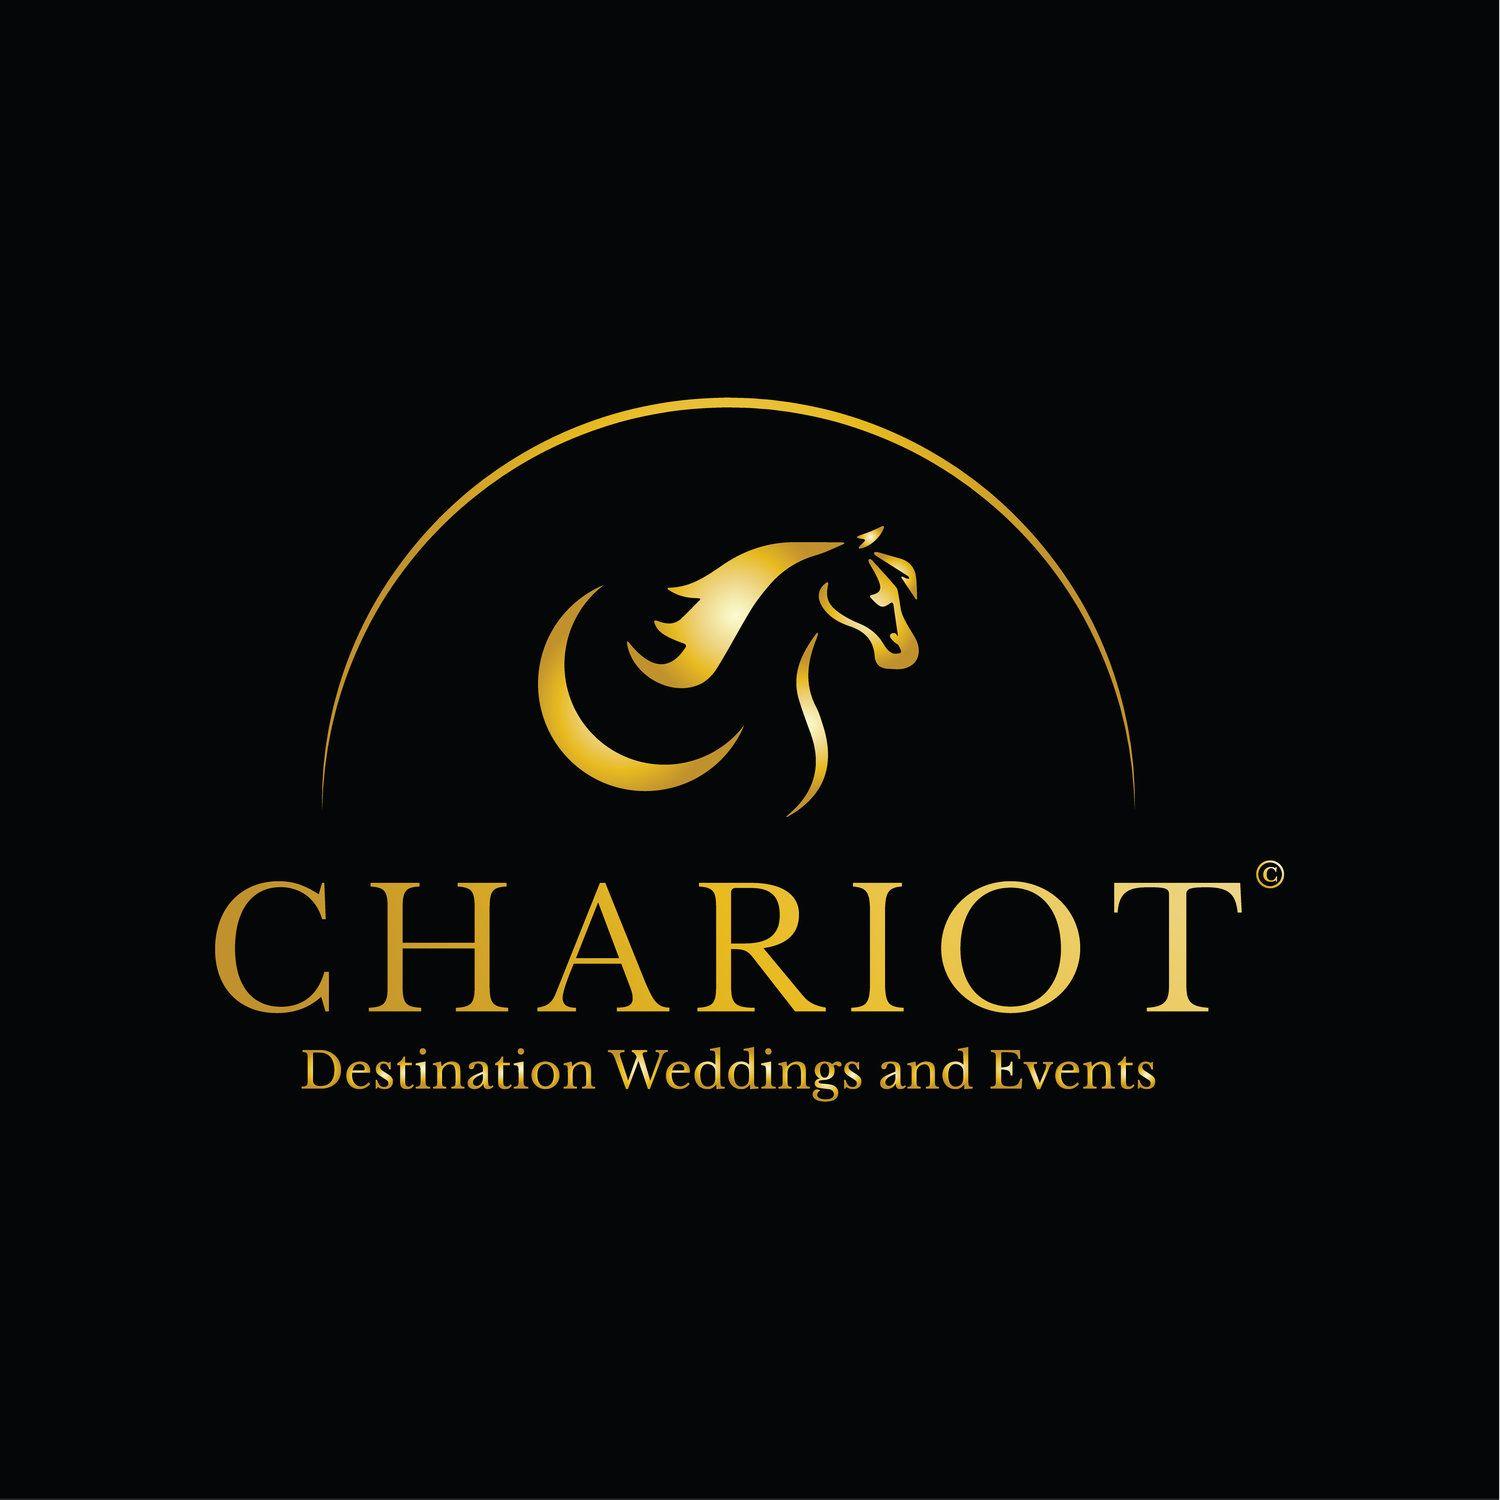 Chariot Logo - Chariot - Destination Weddings in Tropical Paradises of Southeast Asia